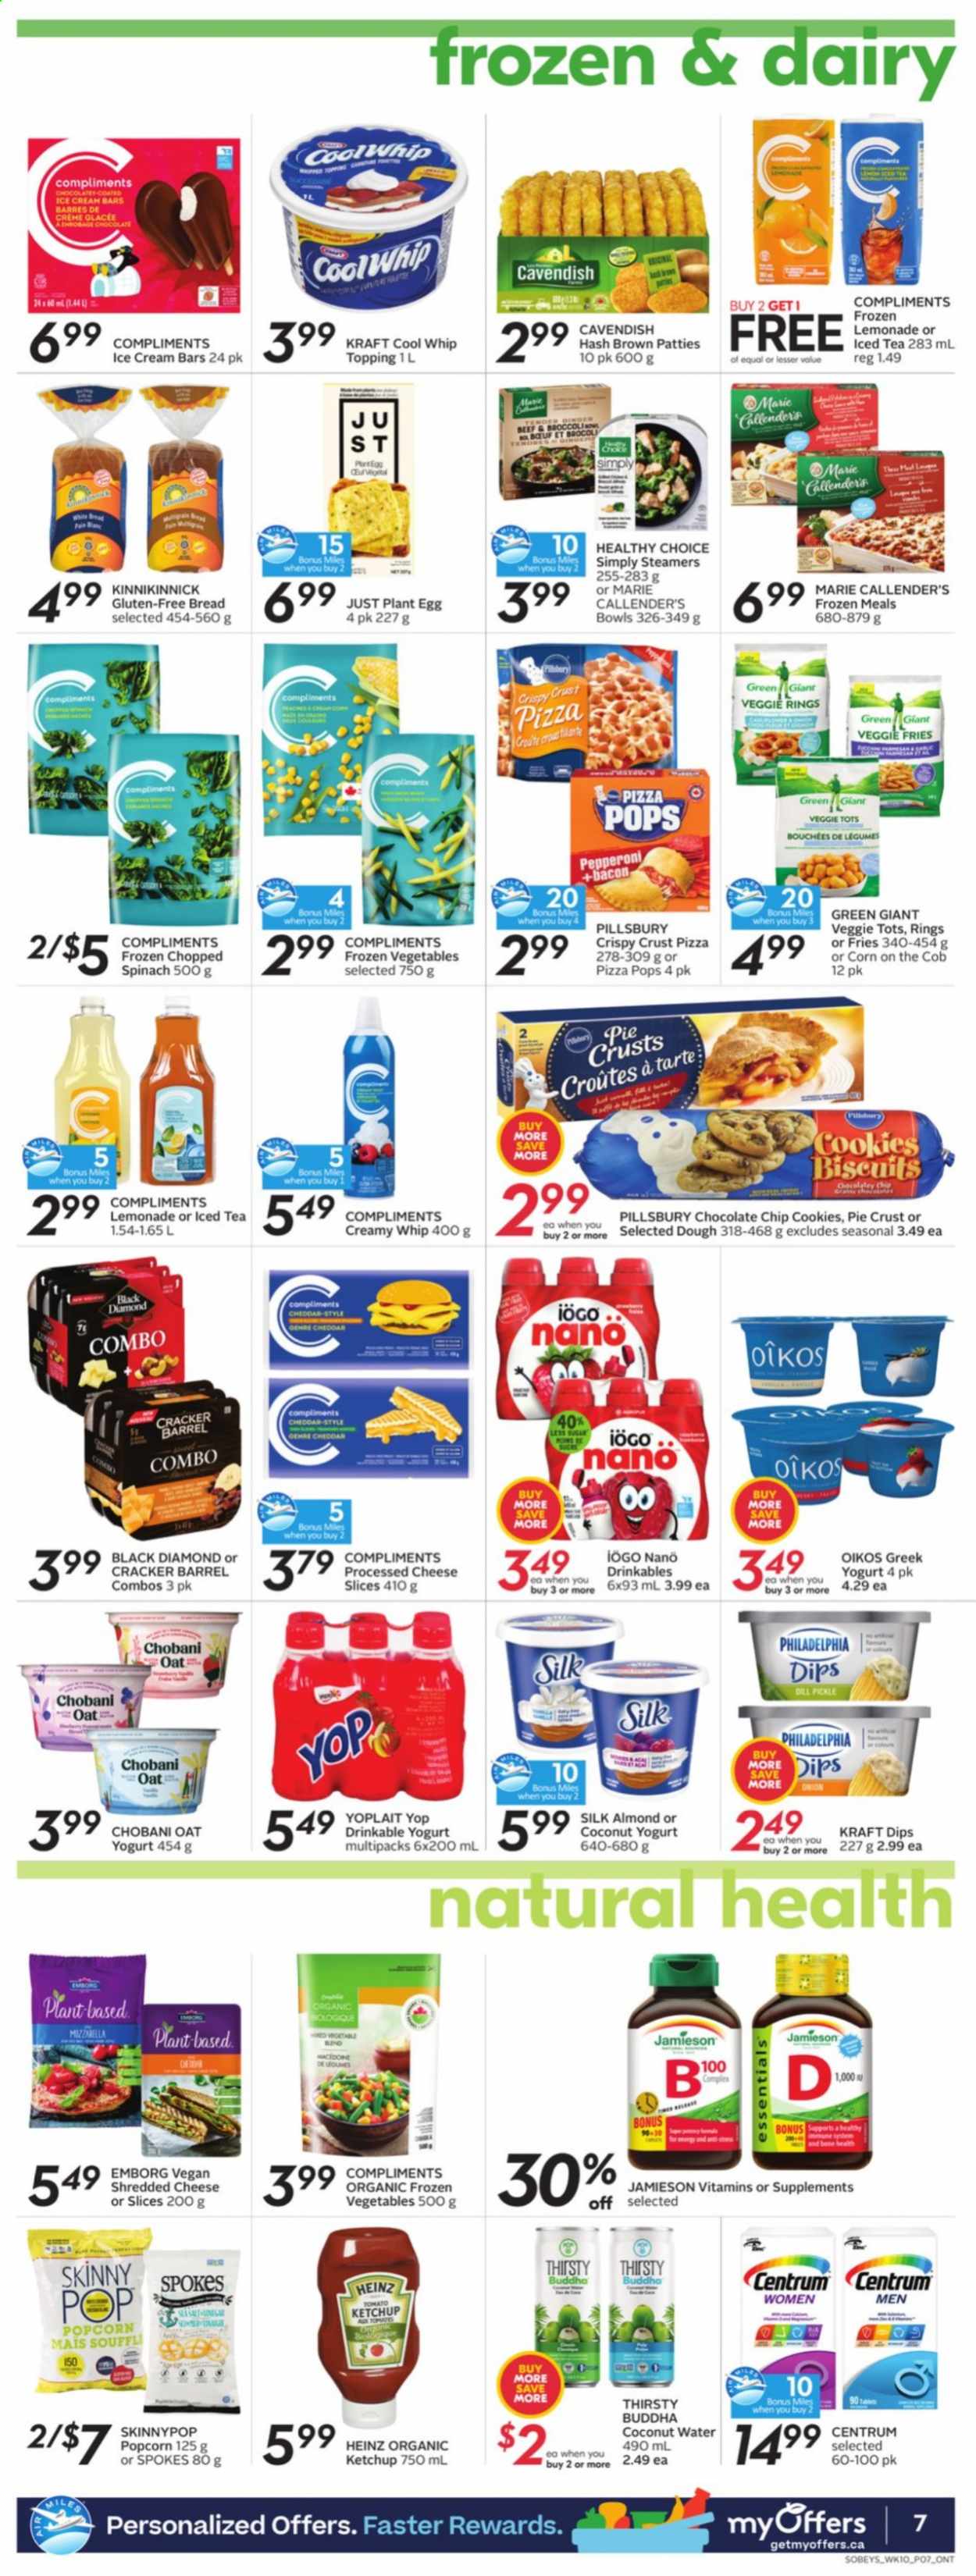 thumbnail - Sobeys Flyer - July 01, 2021 - July 07, 2021 - Sales products - bread, corn, onion, pizza, Pillsbury, Healthy Choice, Marie Callender's, Kraft®, bacon, pepperoni, shredded cheese, sliced cheese, cheddar, greek yoghurt, yoghurt, Oikos, Yoplait, Chobani, eggs, Cool Whip, ice cream, ice cream bars, frozen vegetables, veggie fries, cookies, crackers, dill pickle, popcorn, Skinny Pop, pie crust, oats, topping, Heinz, dill, ice tea, coconut water, Centrum. Page 8.